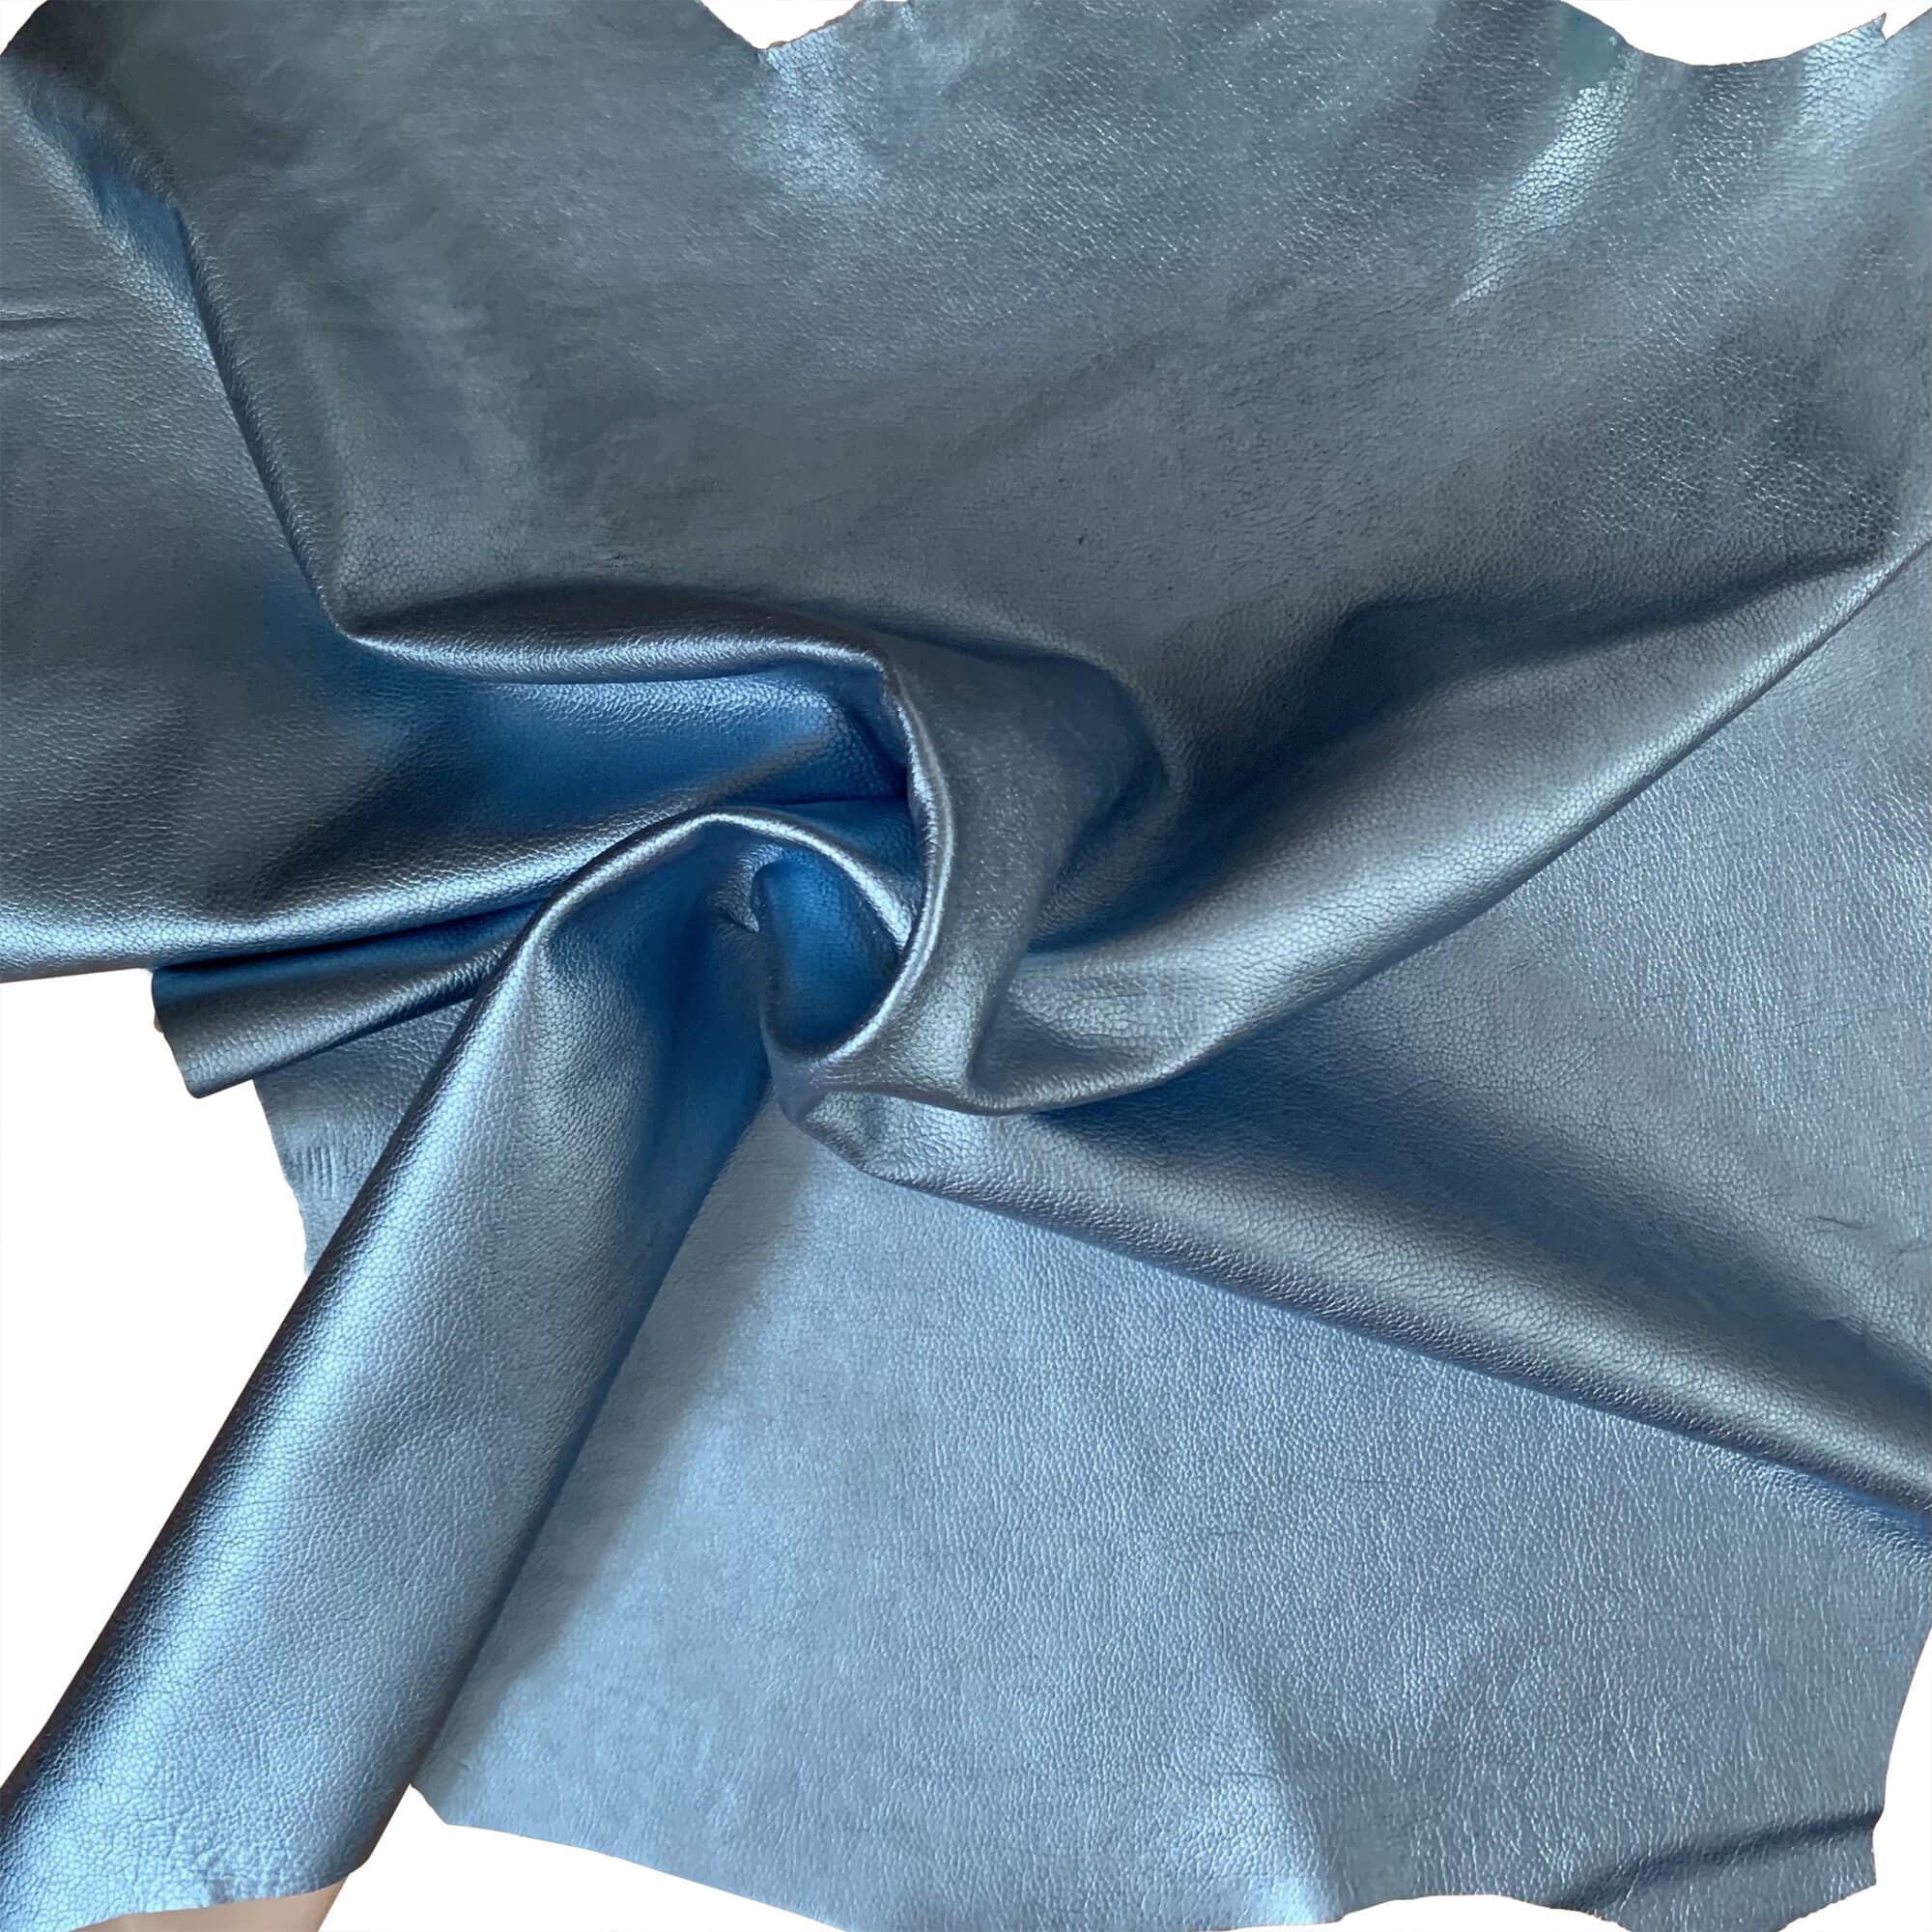 BLUE Leather Scraps Real Soft Sheep Skin Pieces for Crafts Blue Leather  Sheets Genuine Sheep Skin Sheets Earring Material Offcut Scrap Pack 